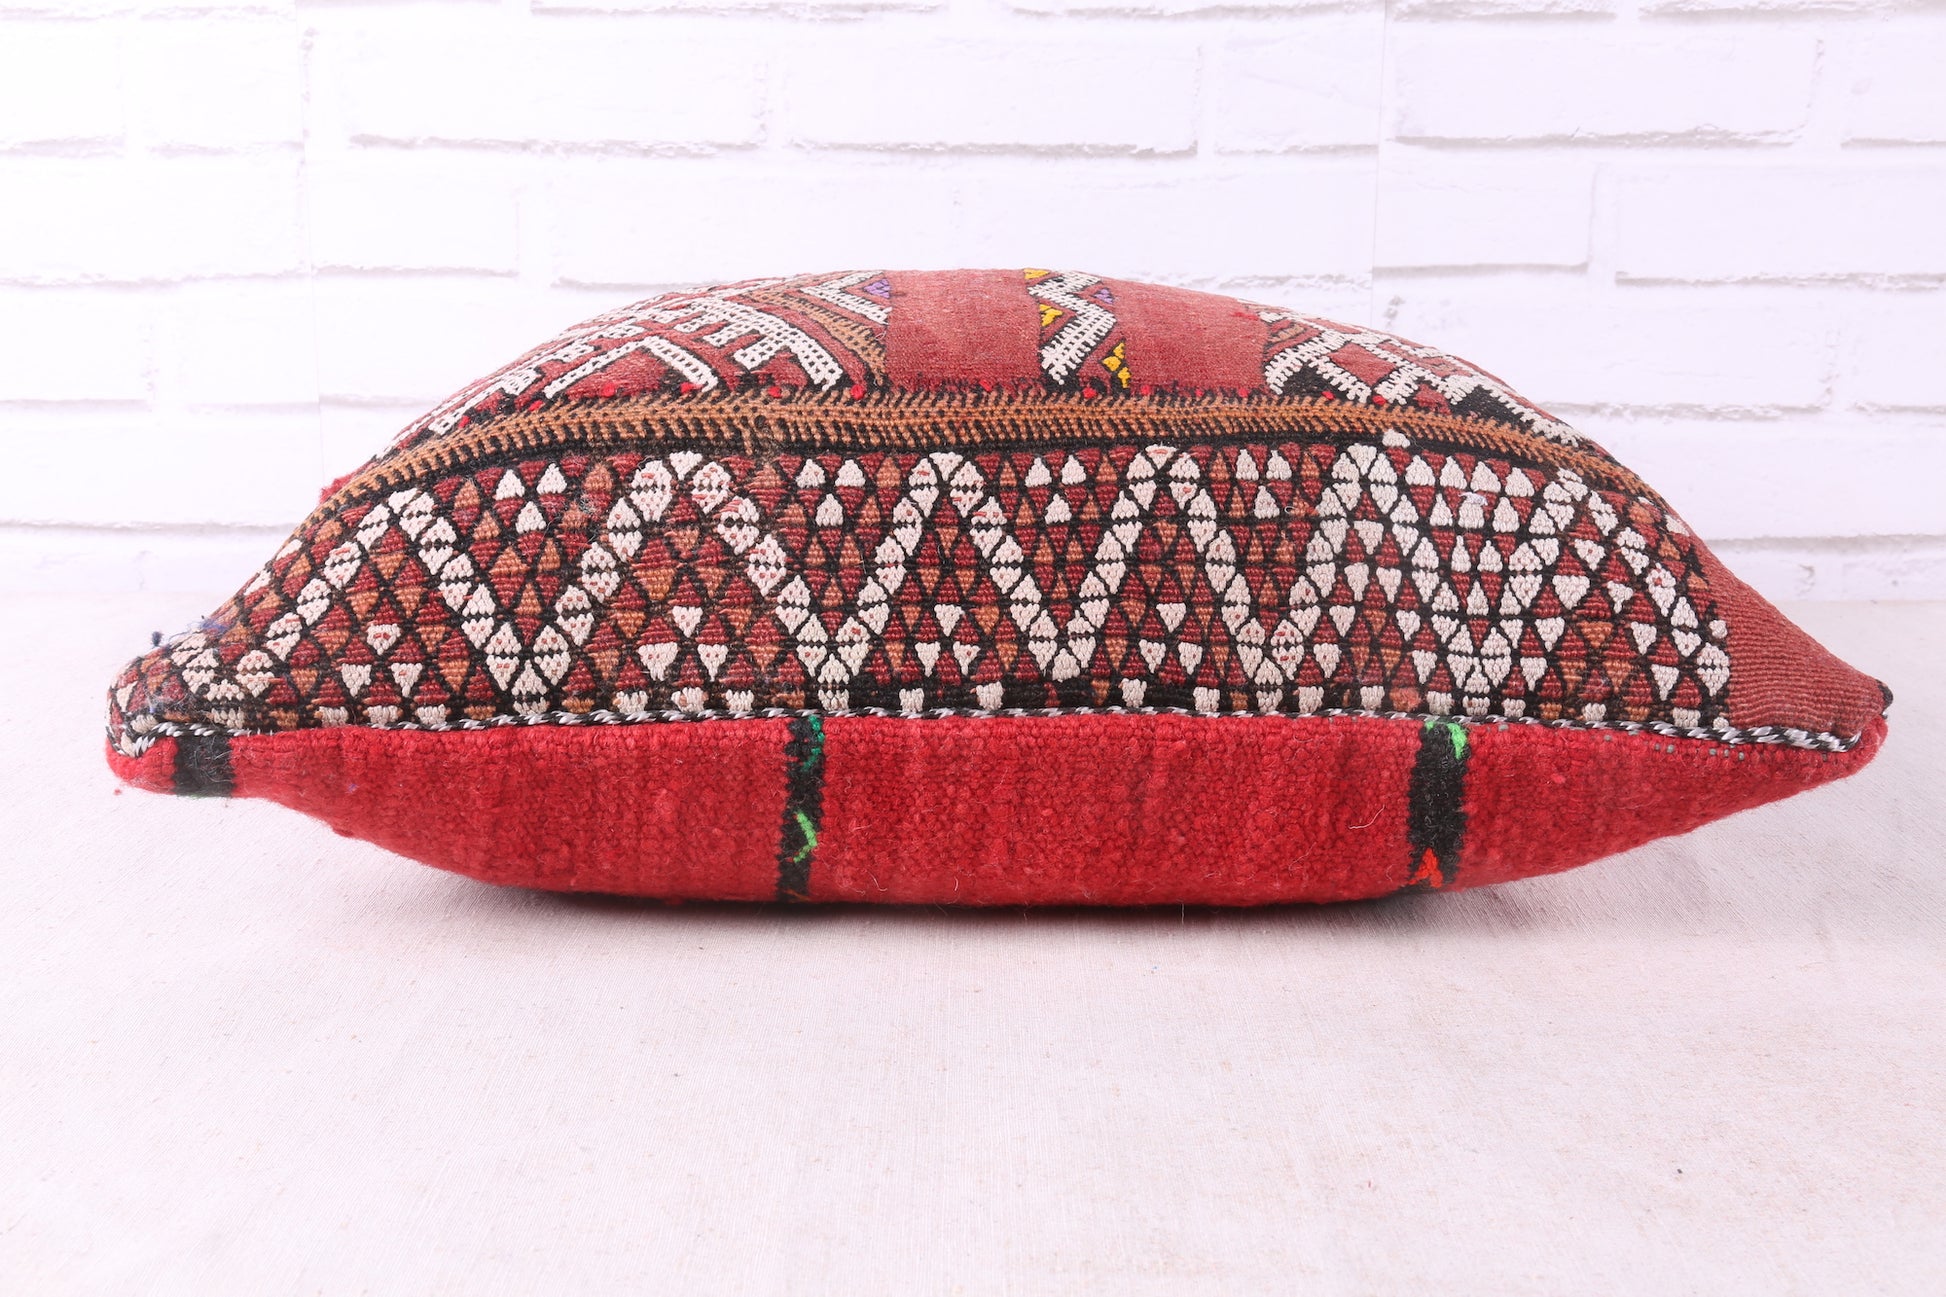 Moroccan Berber Pillow 18.5 inches X 18.5 inches